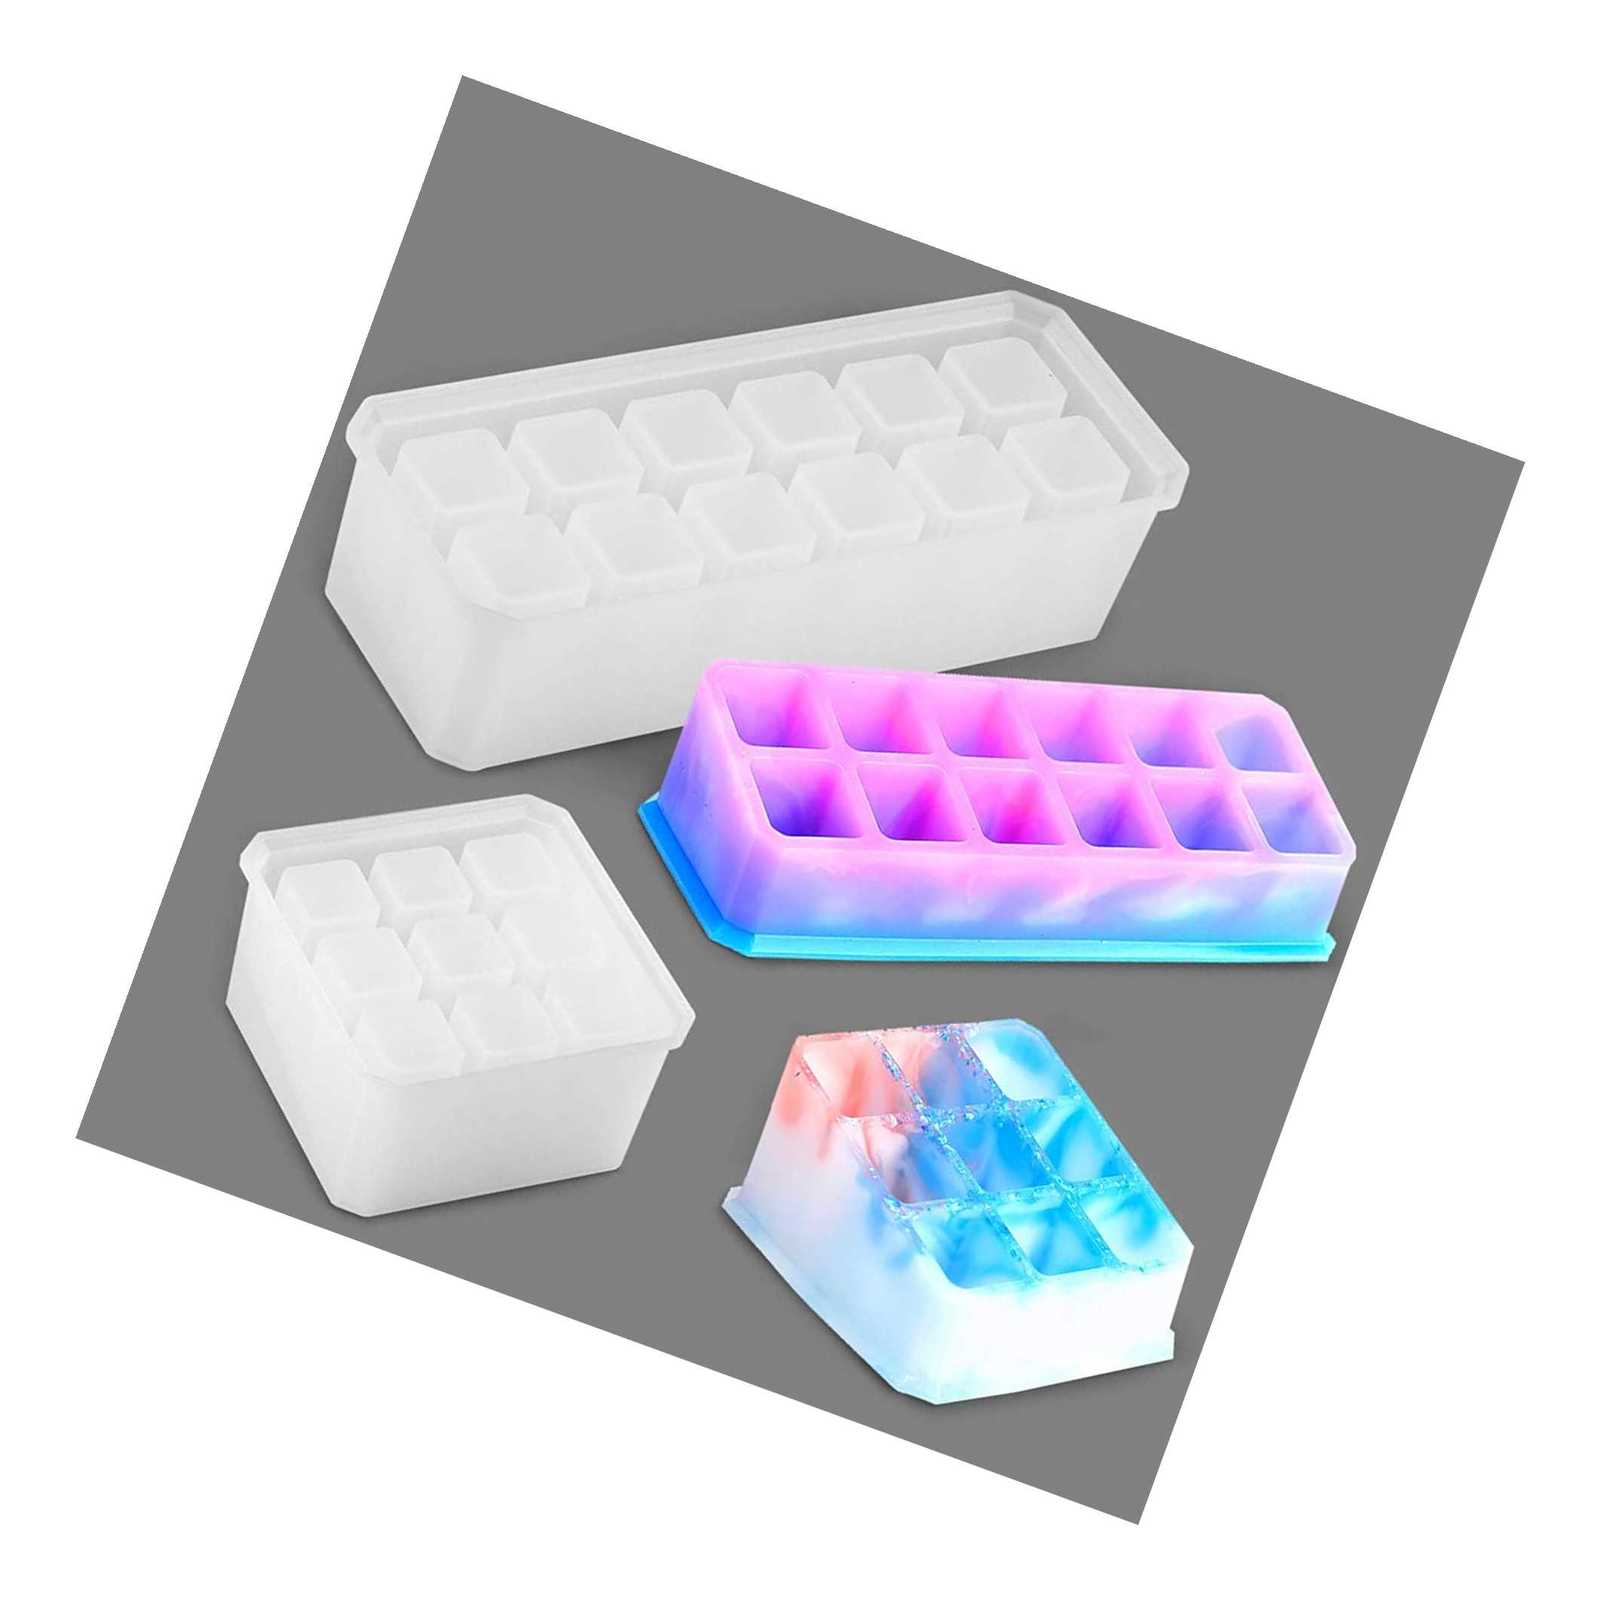 Diy Silicone Epoxy Resin Mold 2-Sizes Multi-Slot Izers Casting Molds For Lips